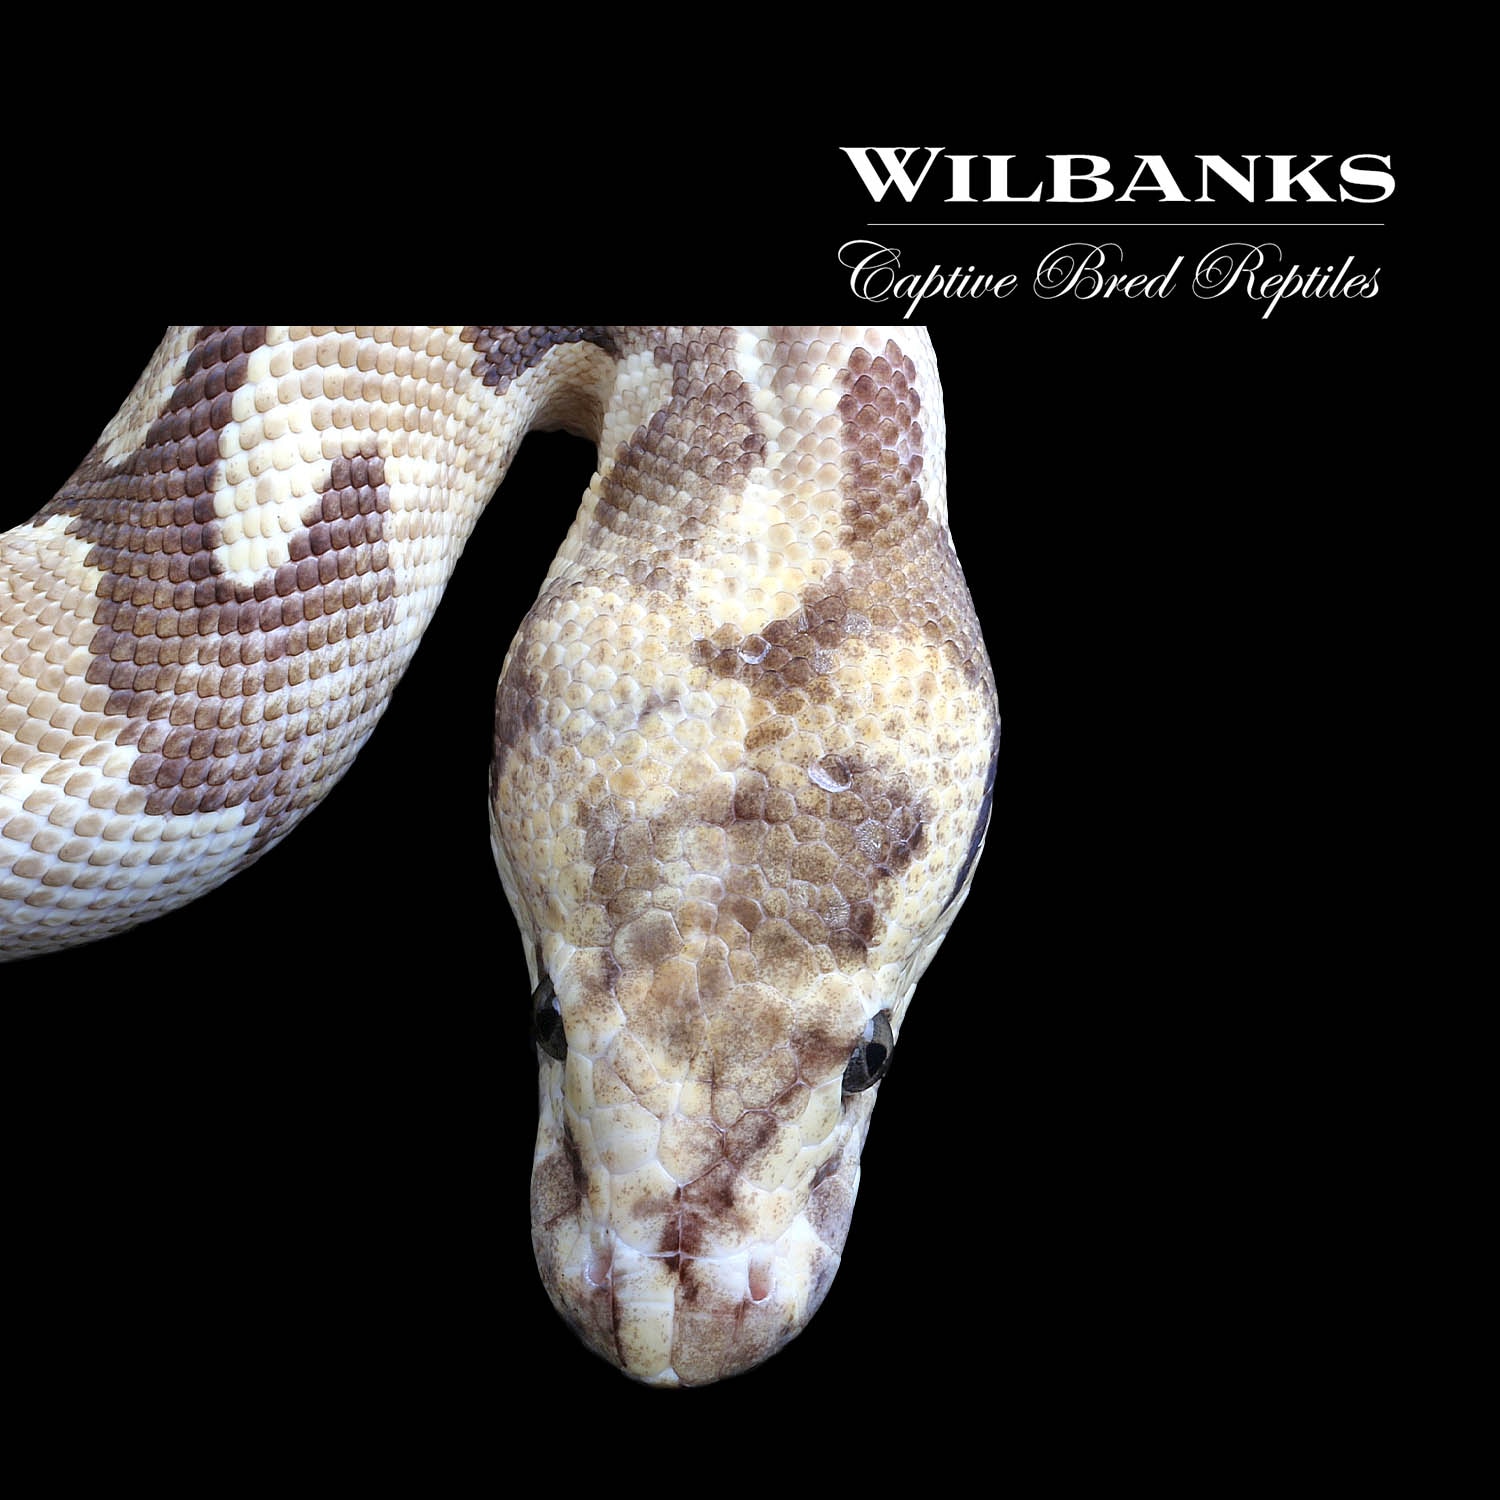 Fire Eclipse 100% Het, Clown Ball Python by Wilbanks Captive Bred Reptiles